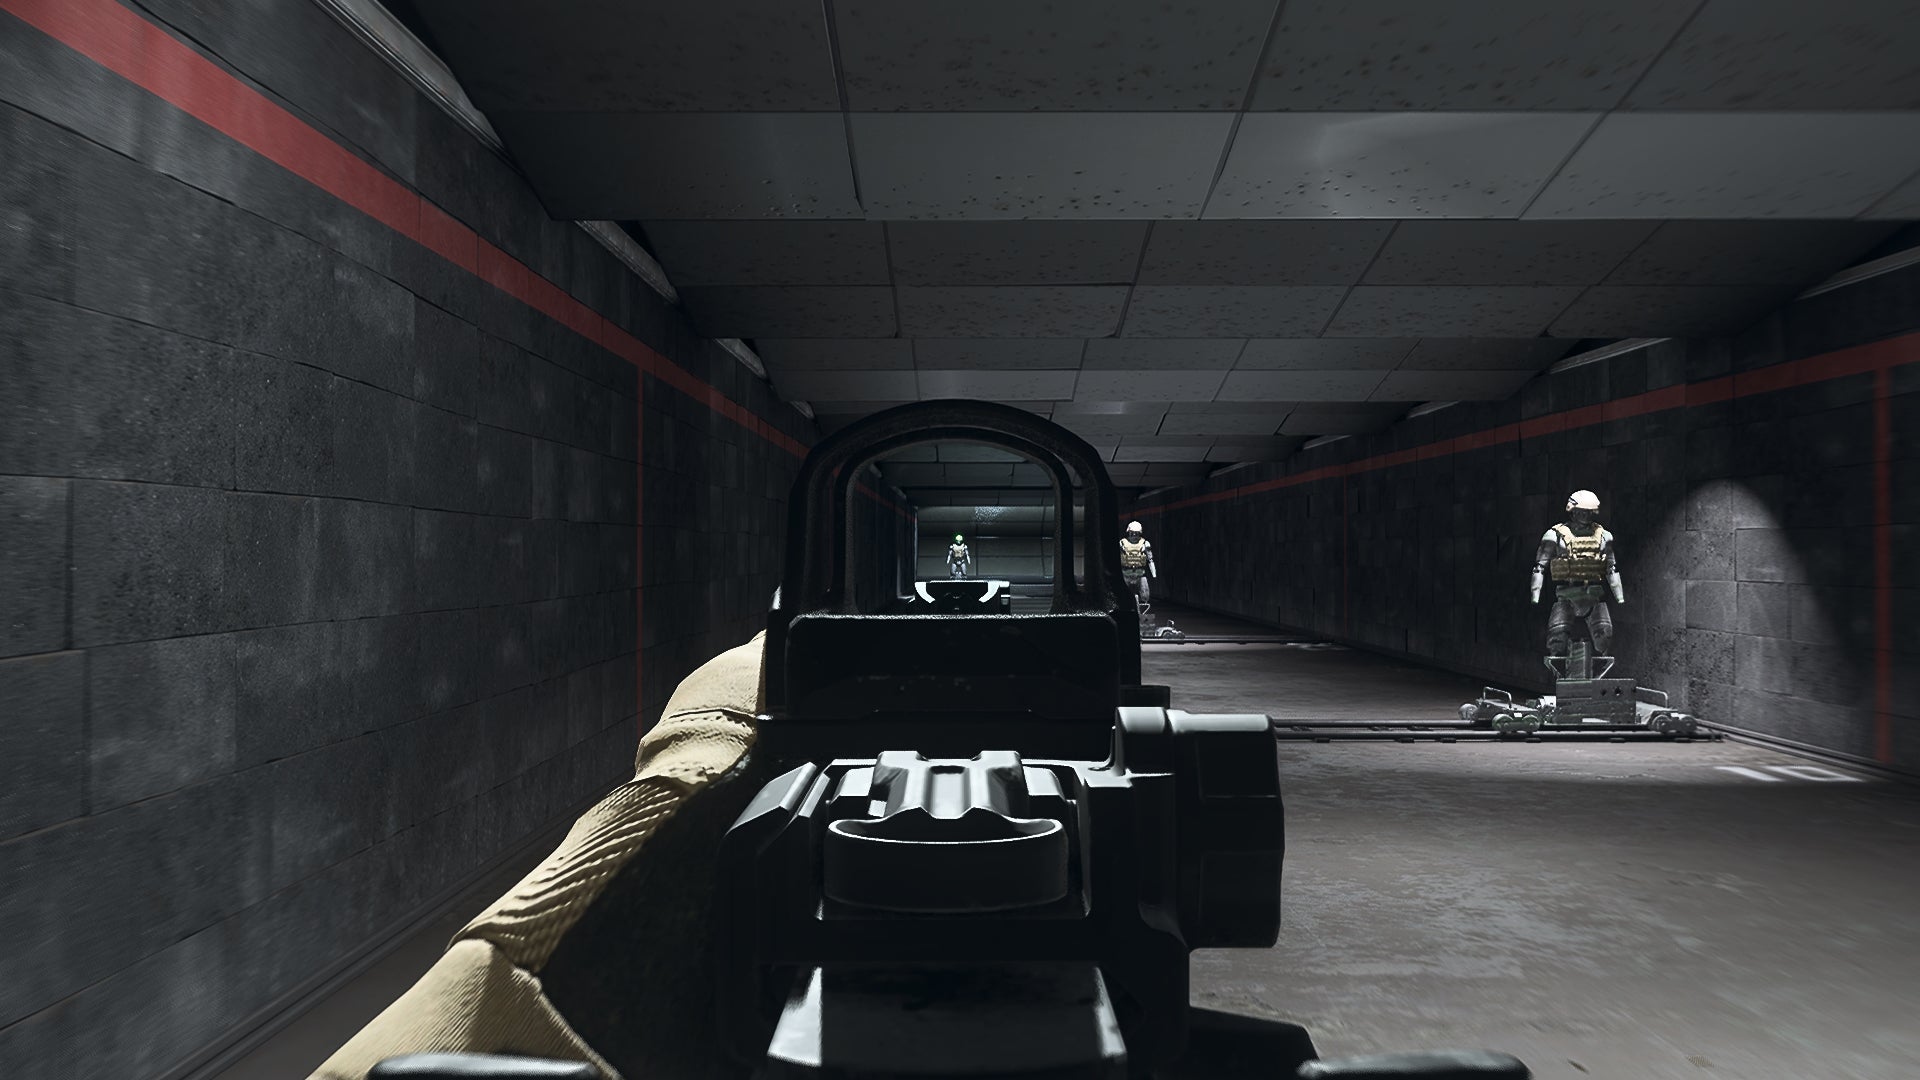 The player in Warzone 2.0 aims at a training dummy using the XRK On Point Optic optic attachment.